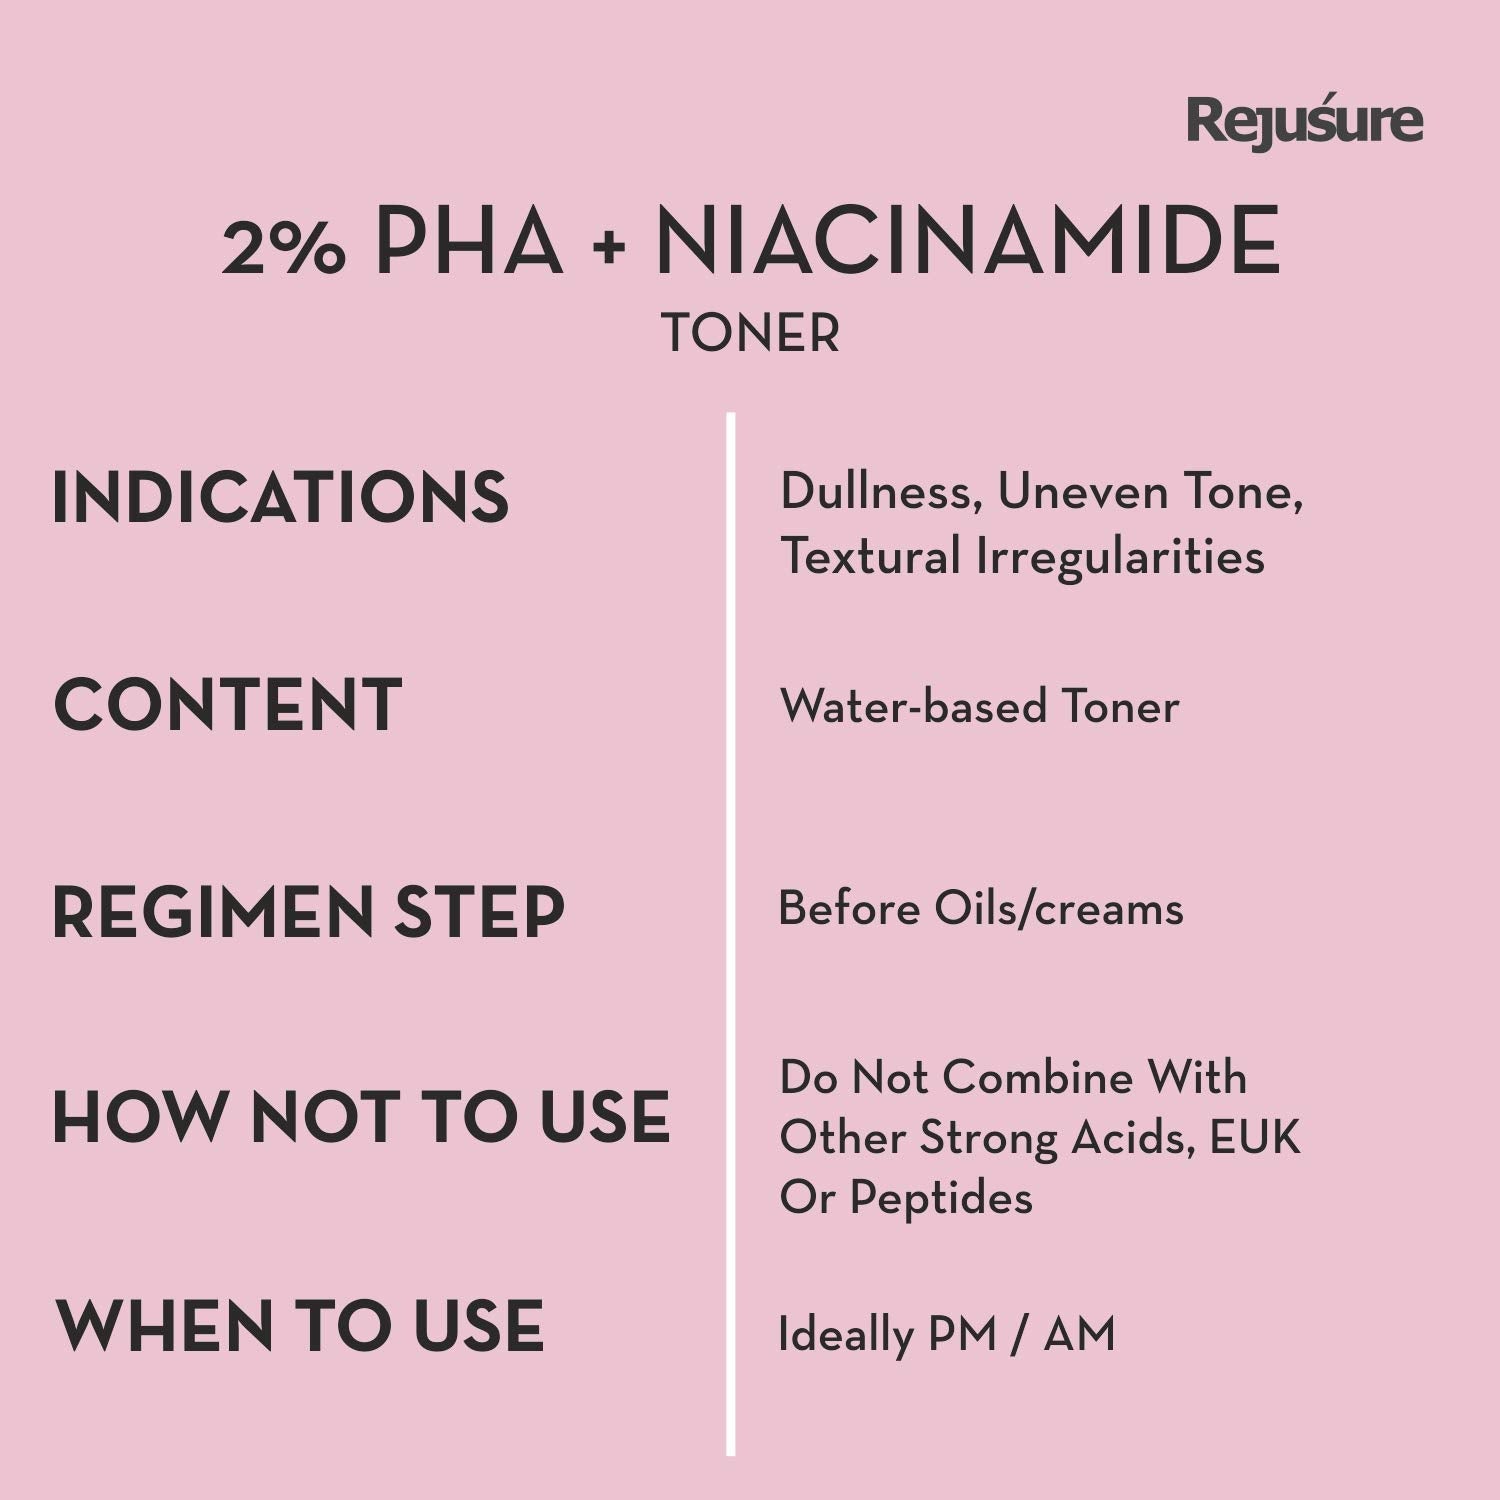 Rejusure PHA 2% + Niacinamide Alcohol Free Face Mist Toner For Mild Exfoliation & Pore Tightening Best for Oily & Normal Skin - 100ml (Pack of 3)